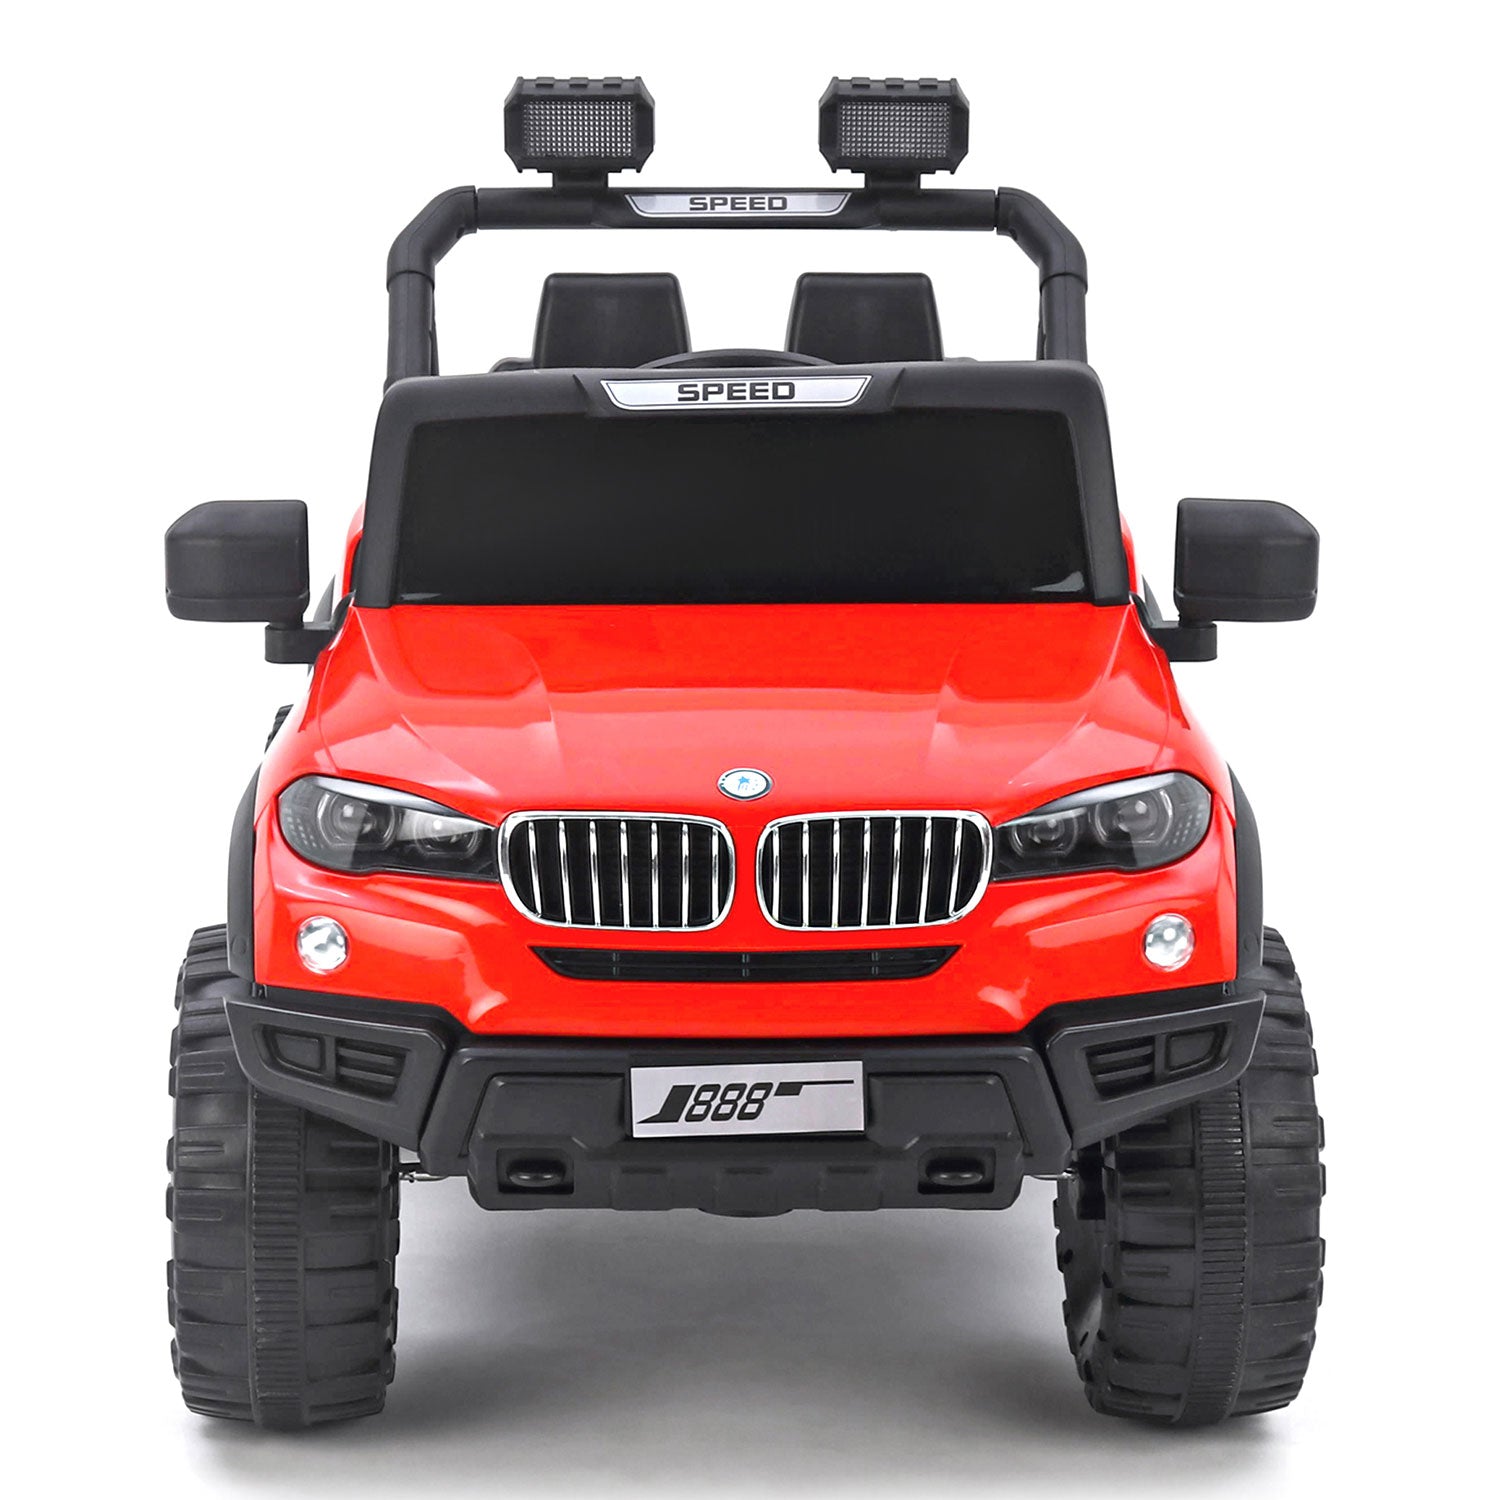 Baby Moo 4X4 Mercedes Benz Electric Ride-On Car for Kids | Rechargeable Battery | Bluetooth Remote Control | USB MP3 Player | Double Seat | Age 2-6 - Red